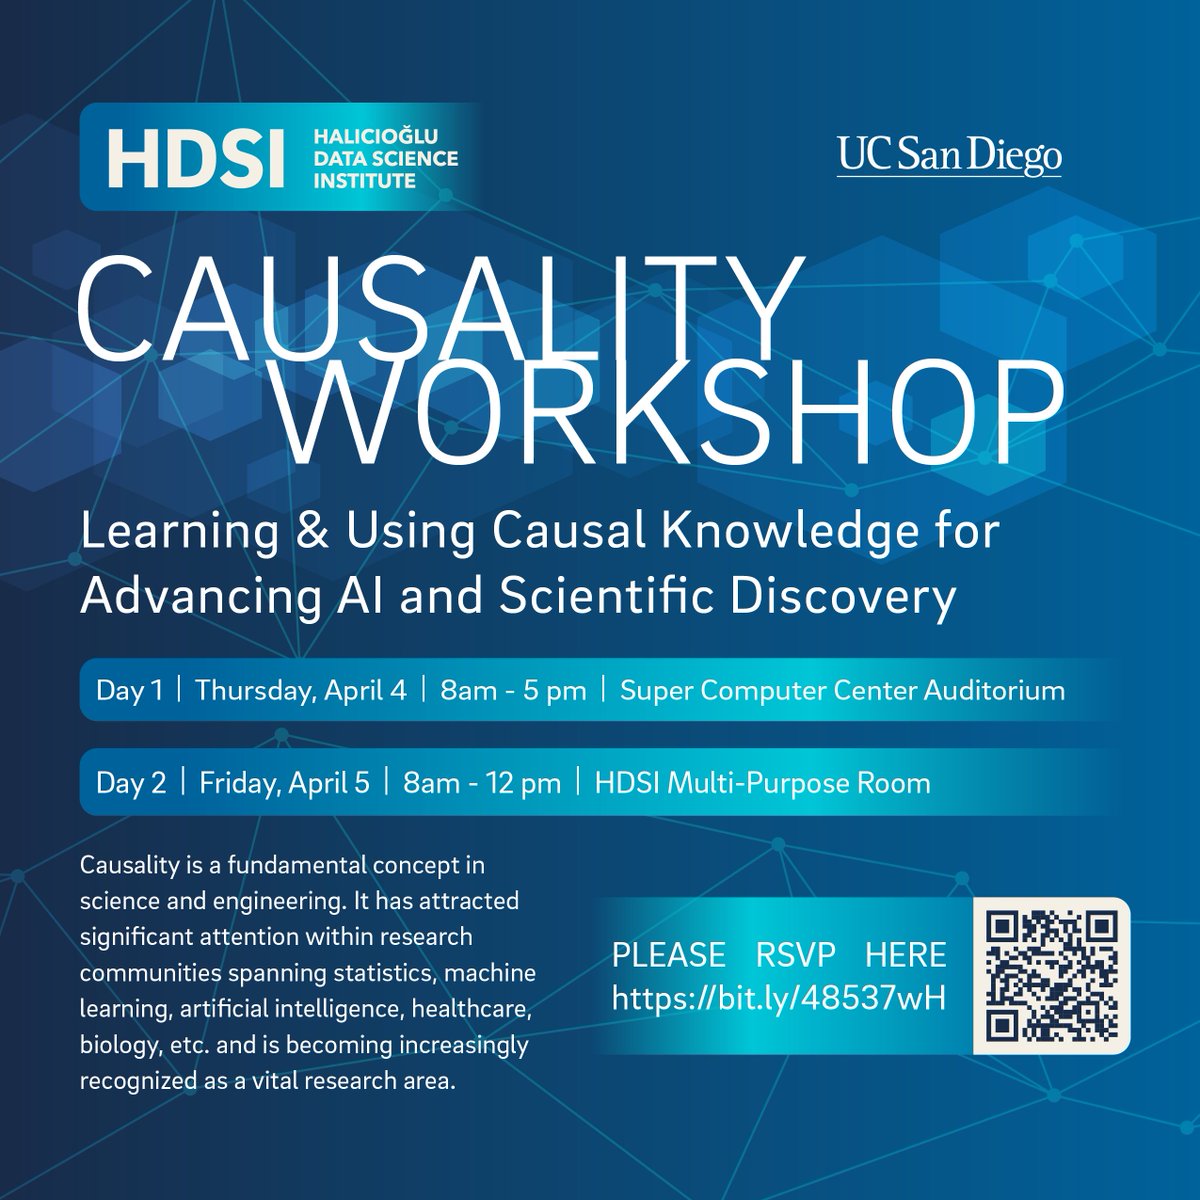 Reminder - the Causality Workshop is happening soon! Don't miss out on this opportunity to advance your understanding and network with experts in the field. RSVP now! #Causality #DataScience #AI #UCSD #HDSI #Workshop